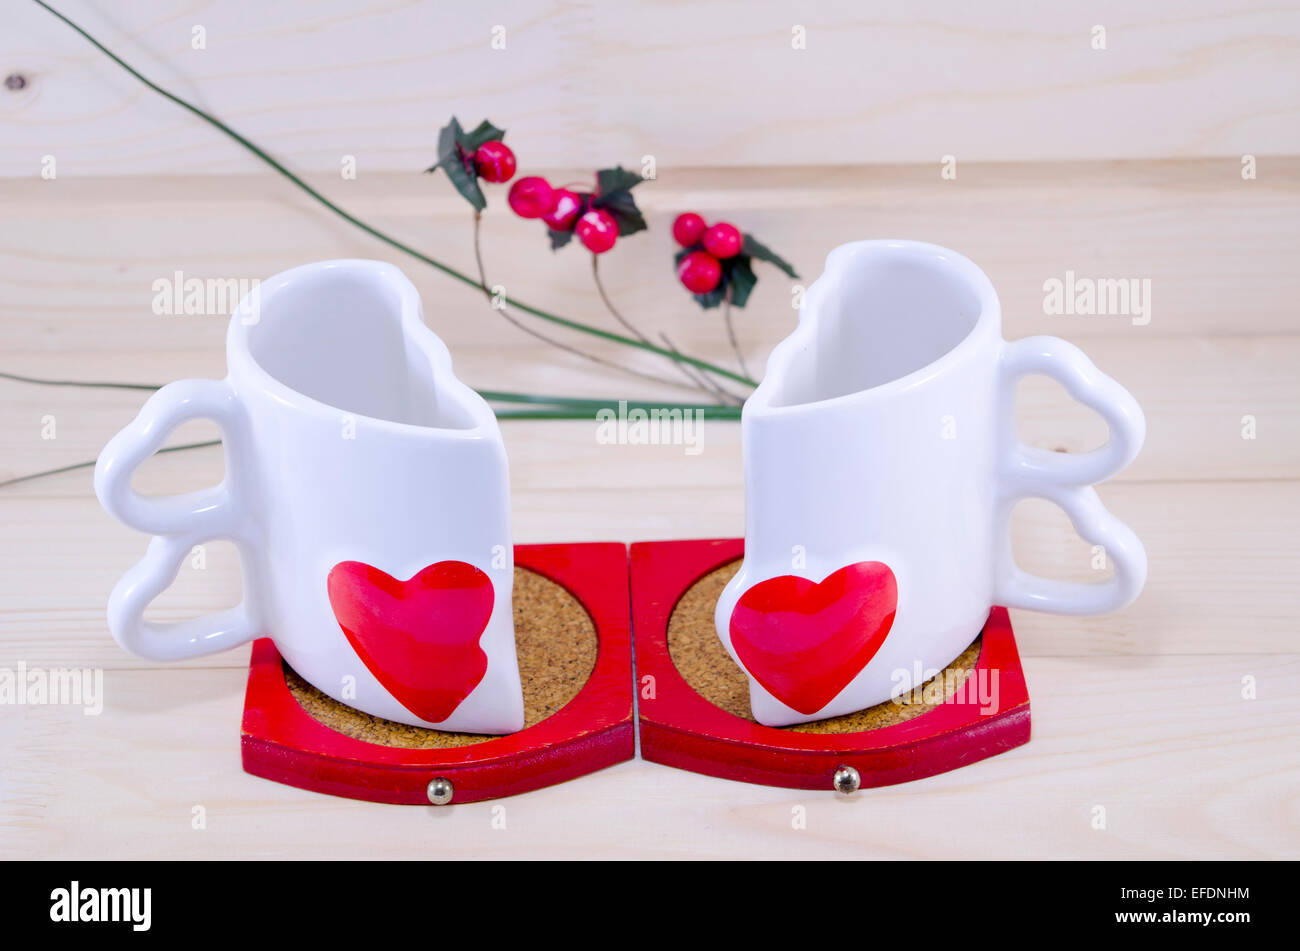 Unique heart shaped coffee mug split apart on a wooden table Stock Photo